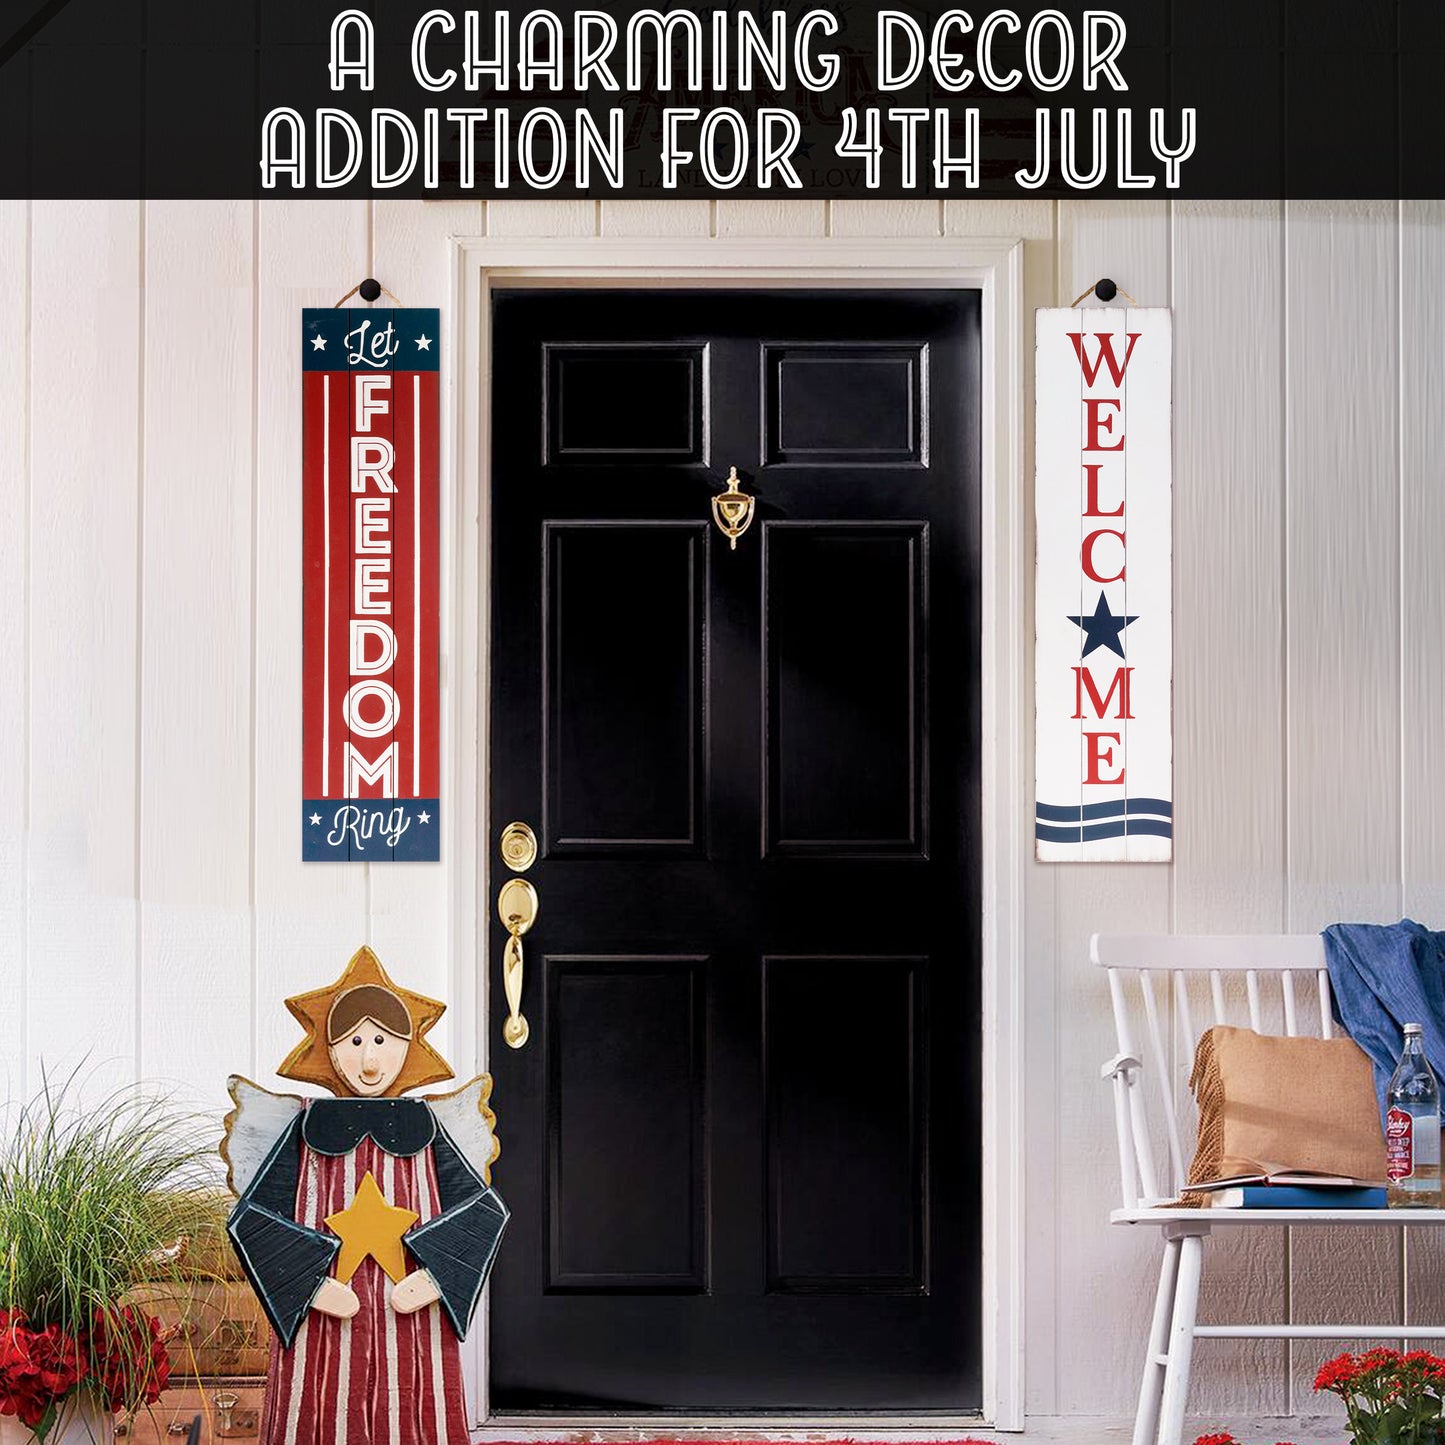 Americana Welcome Sign for Front Door| Memorial Decorations for Outdoor | 36in Rustic Wooden 4th of July Welcome Sign for Front Porch